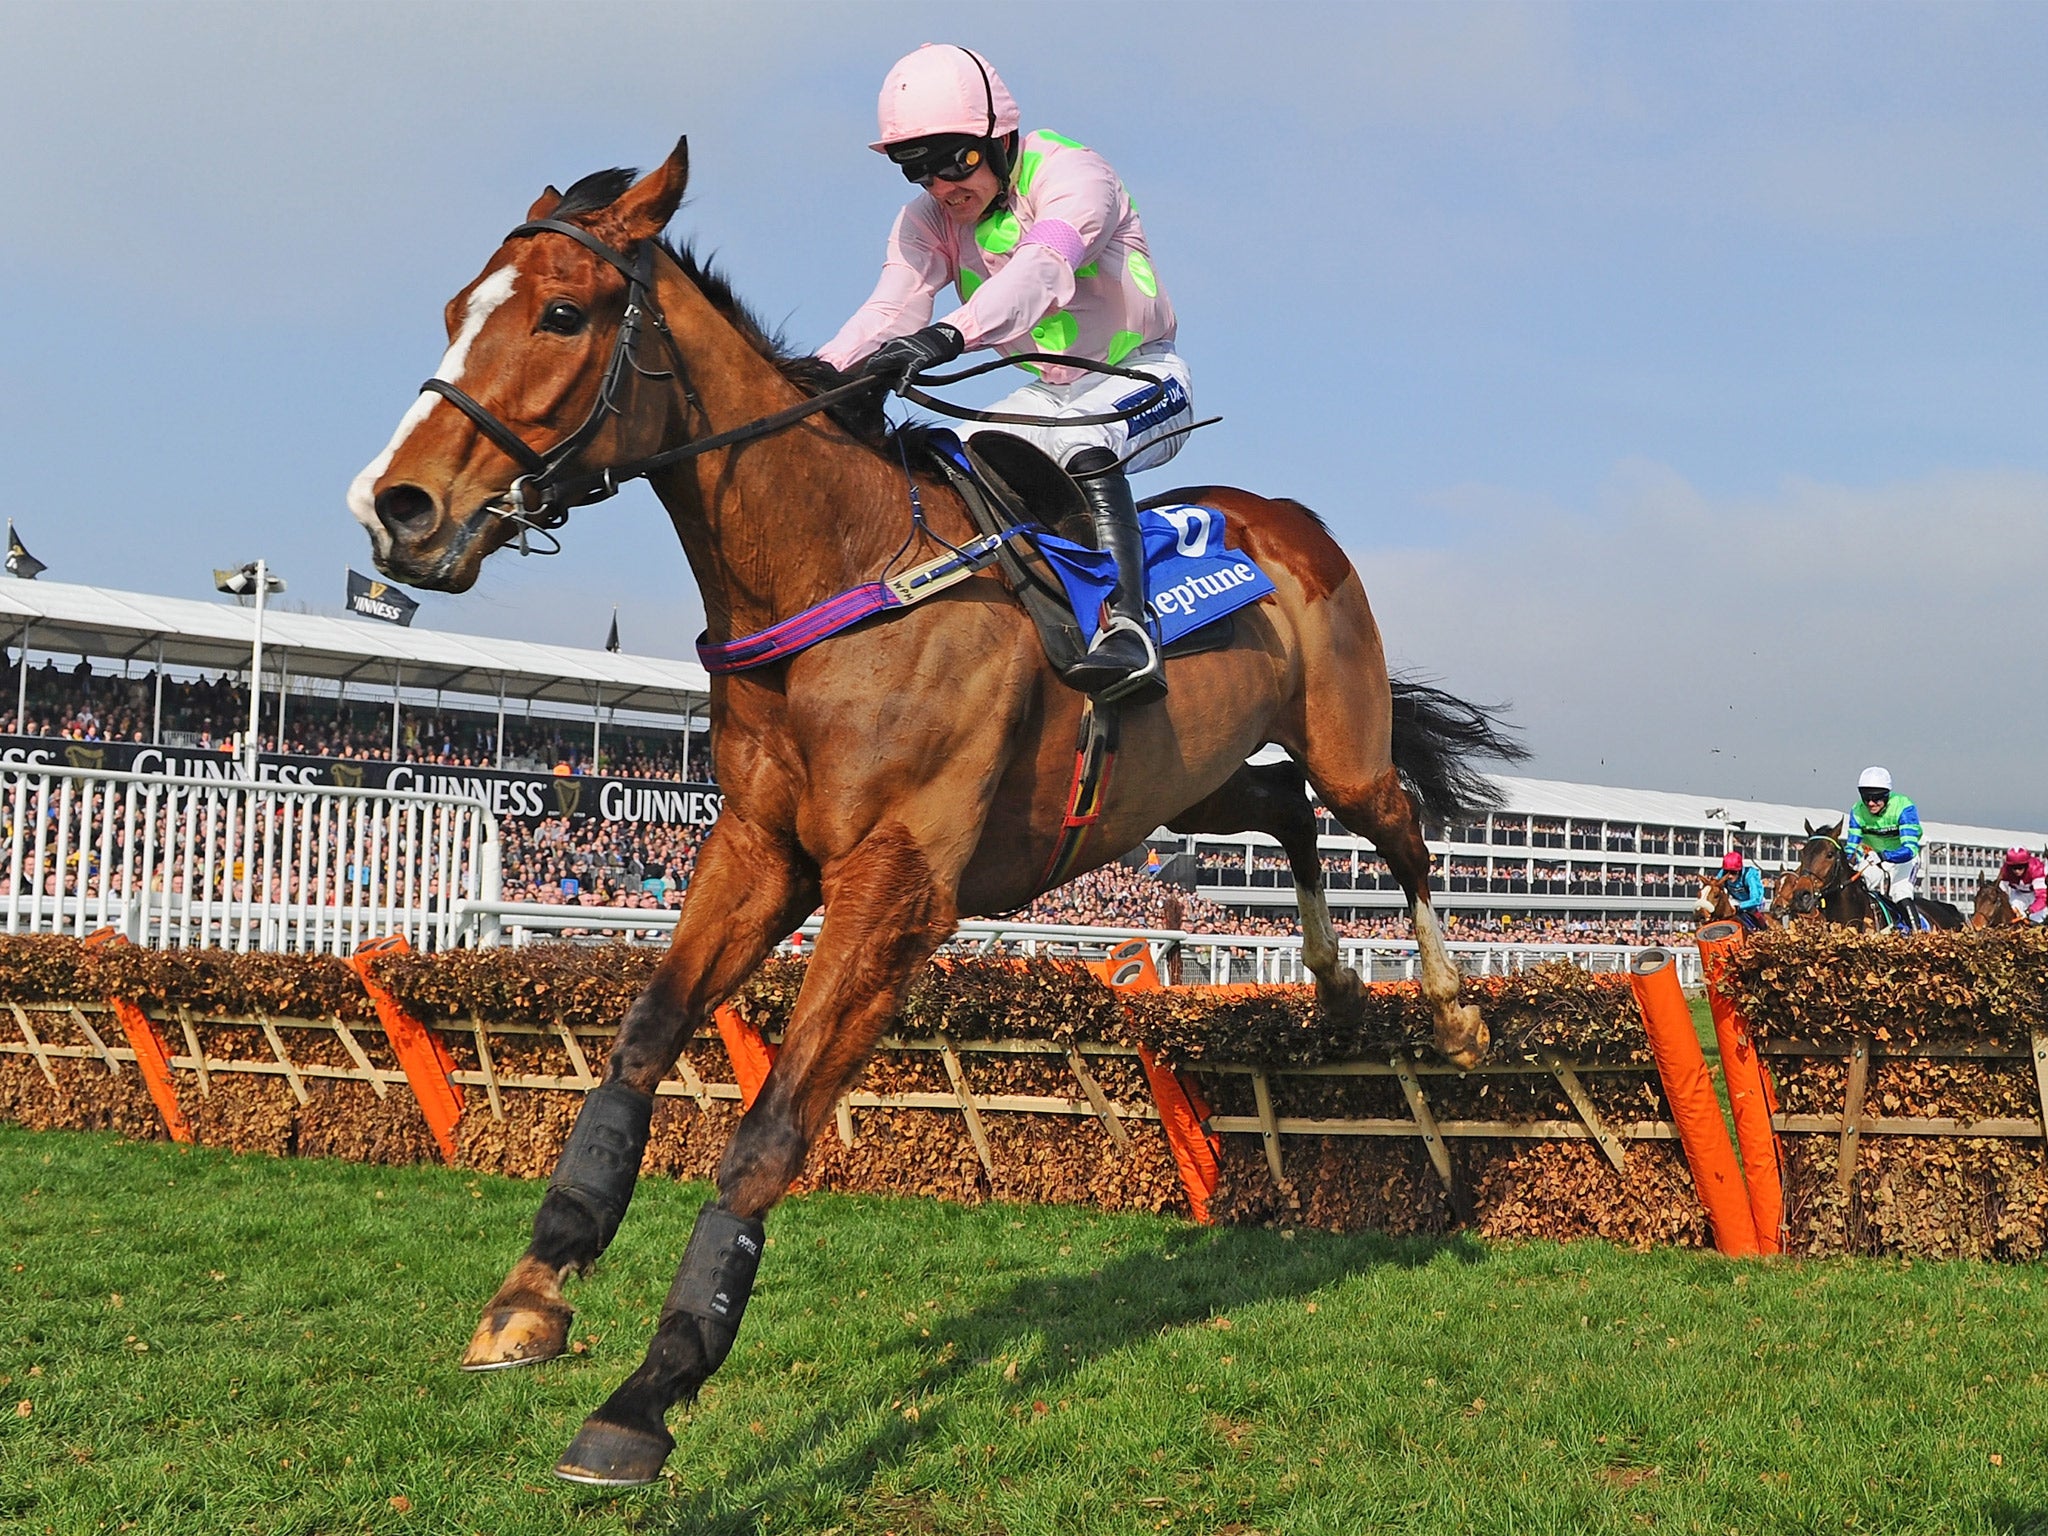 Ruby Walsh on Faugheen clears the last on their way to victory in the Neptune Novices’ Hurdle – his 41st win at the Festival